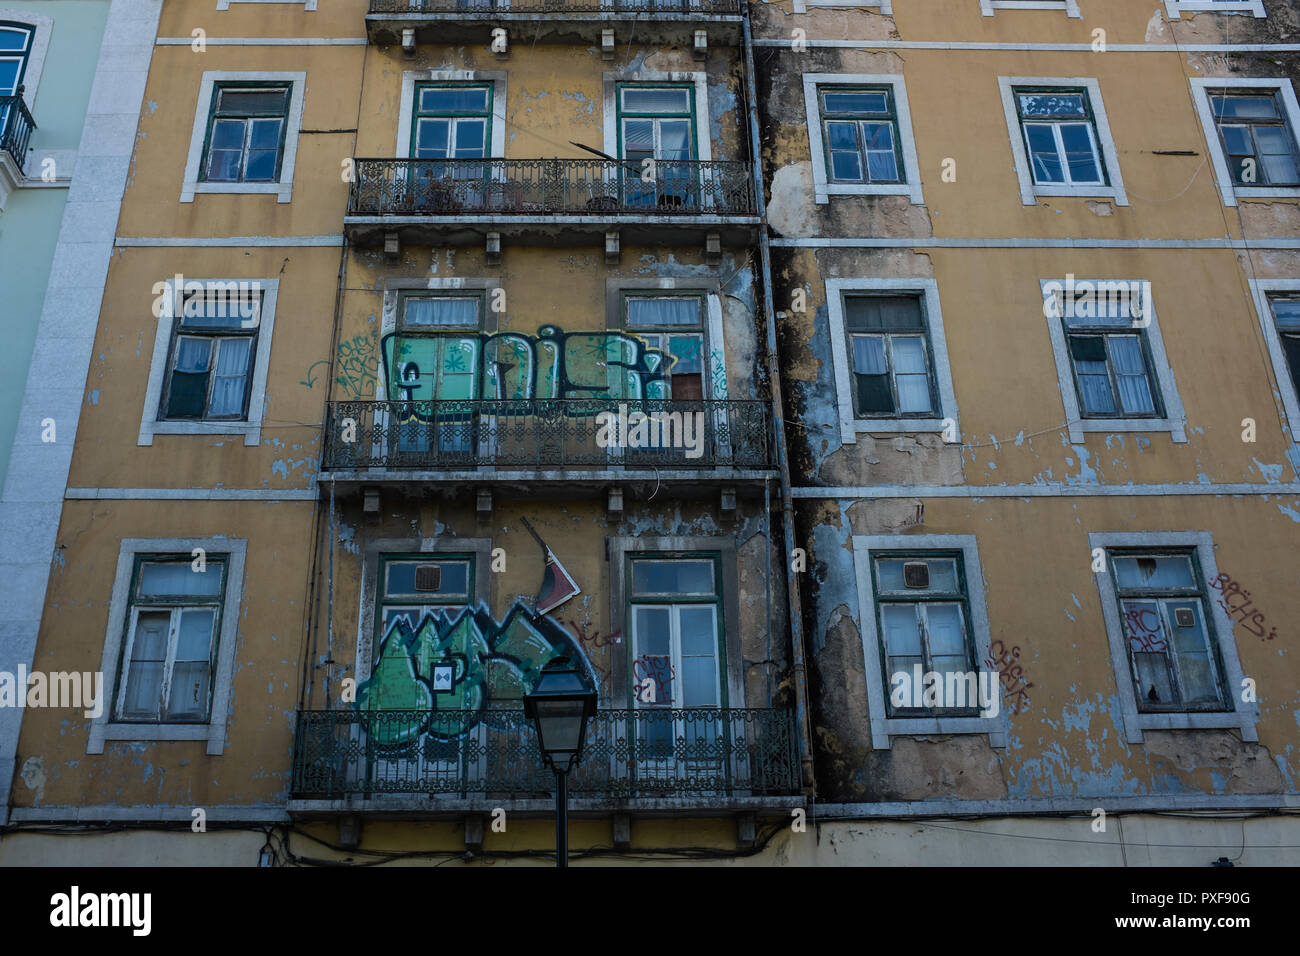 Exterior of a yellow building with graffiti, windows and balconies in Lisbon Portugal Stock Photo